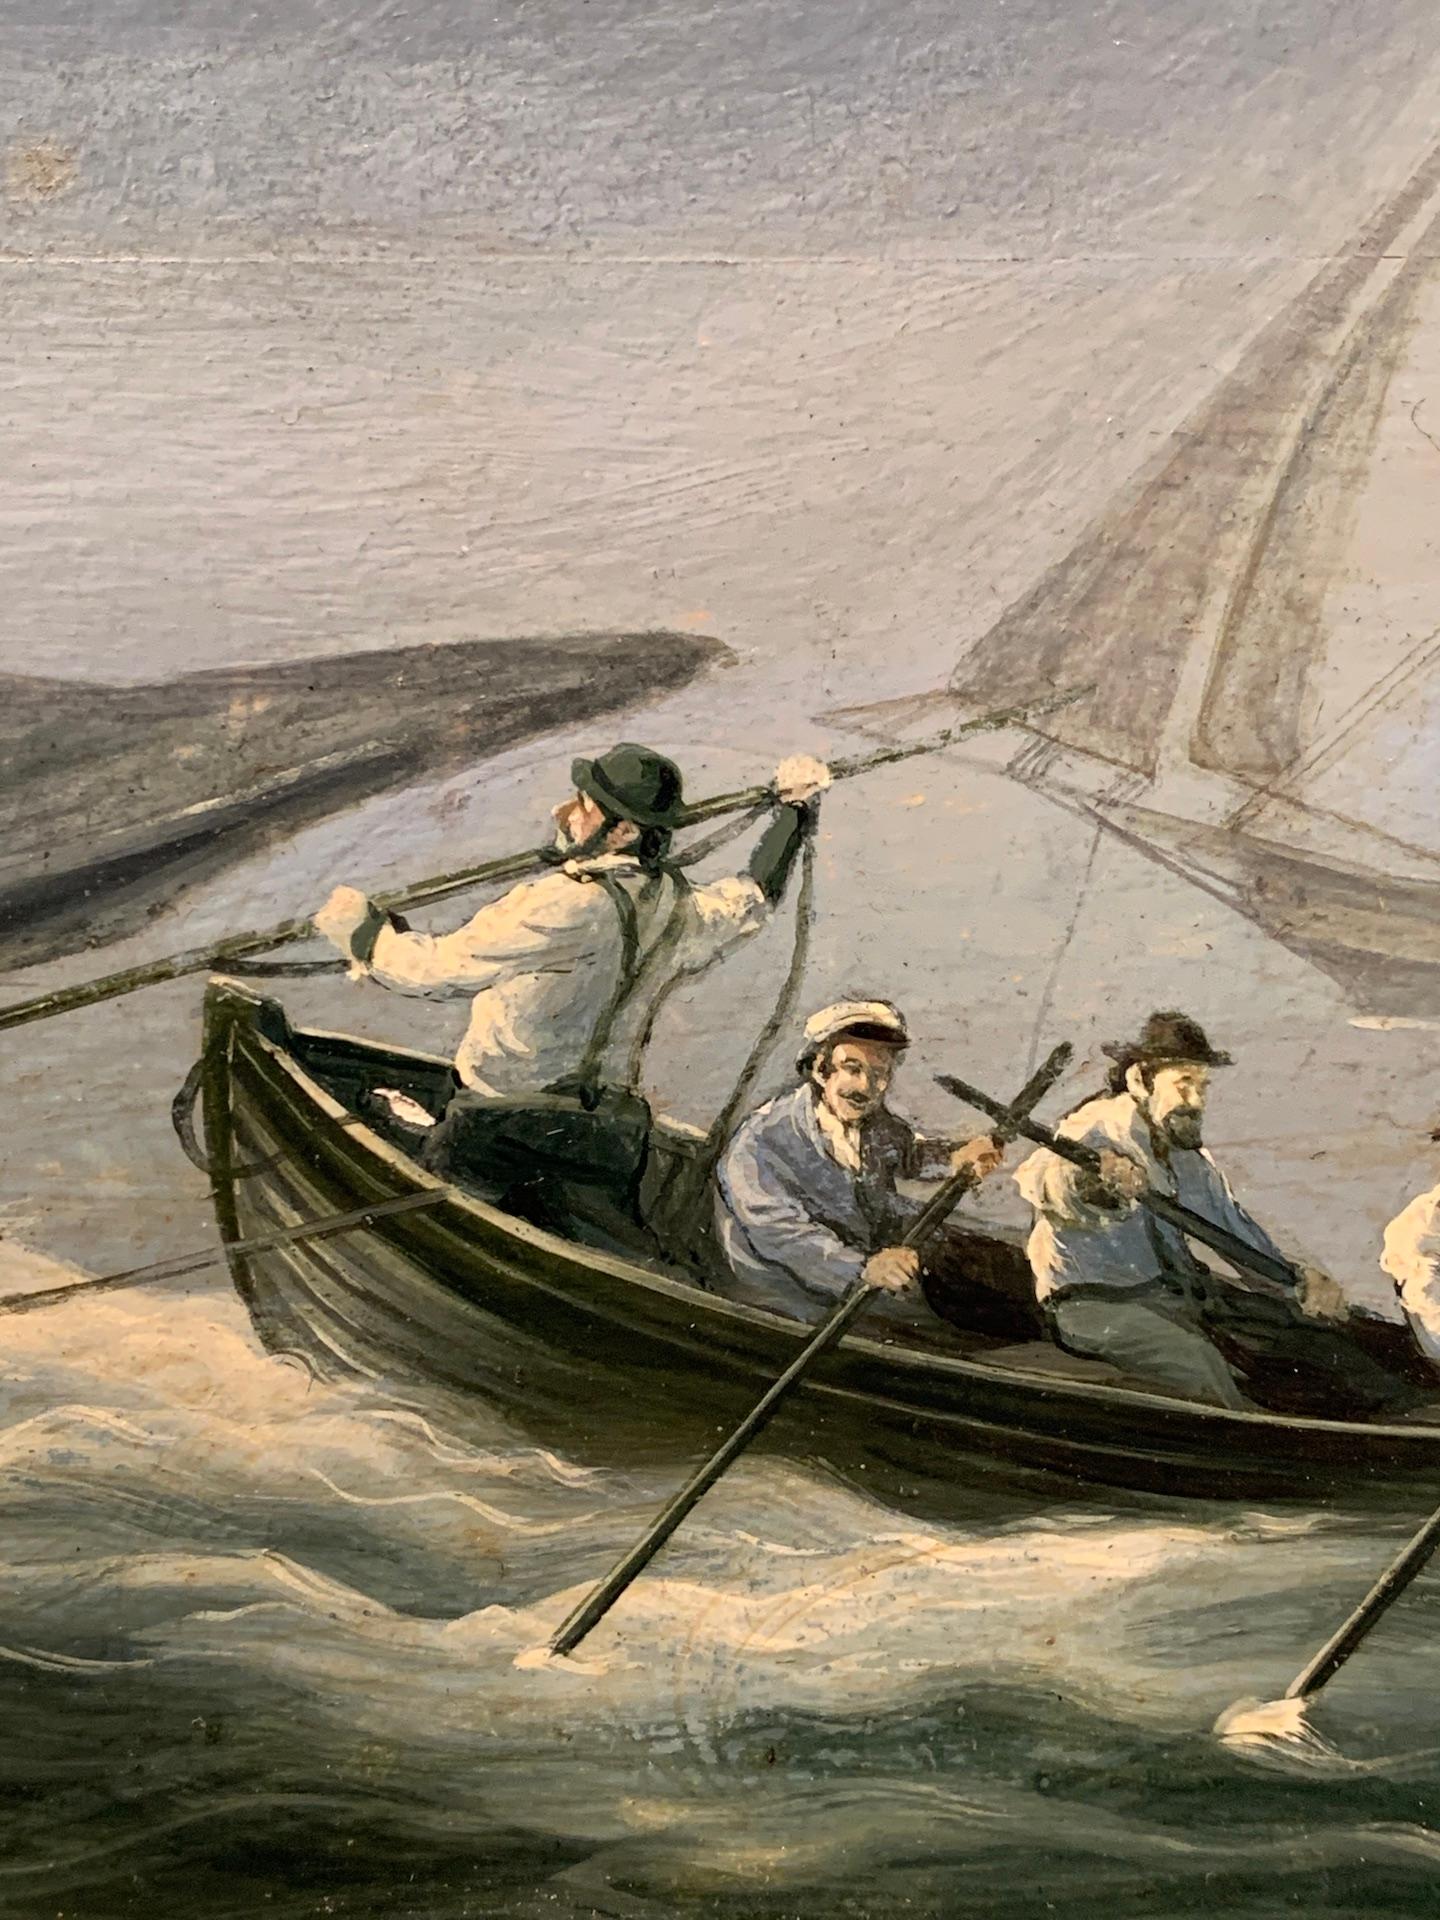 whaling boats in the 1800s